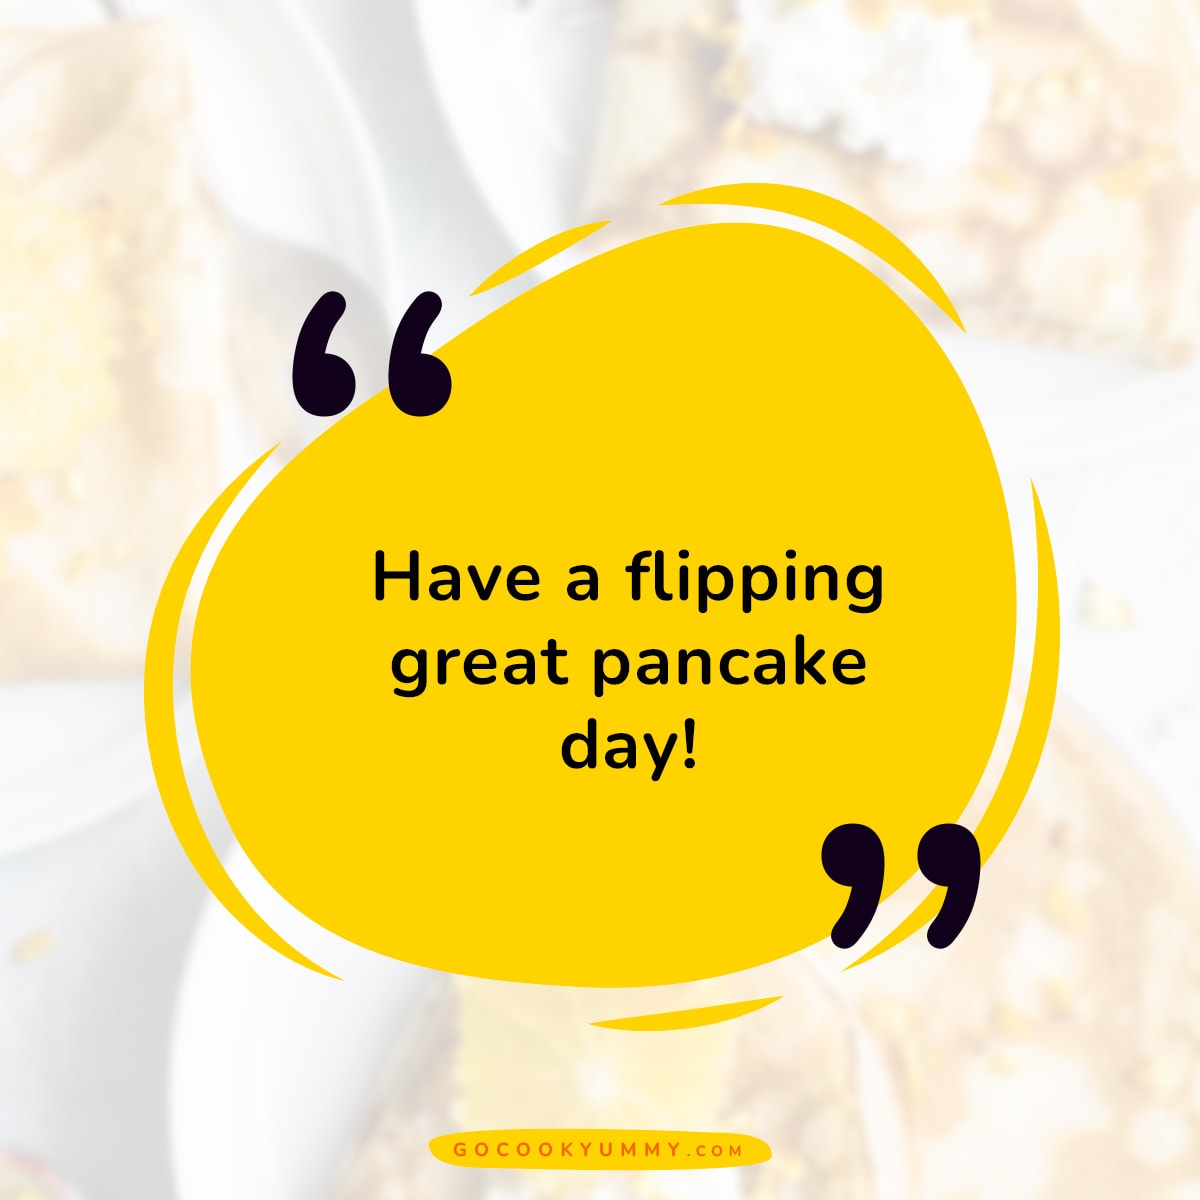 Quote: Have a flipping great pancake day!